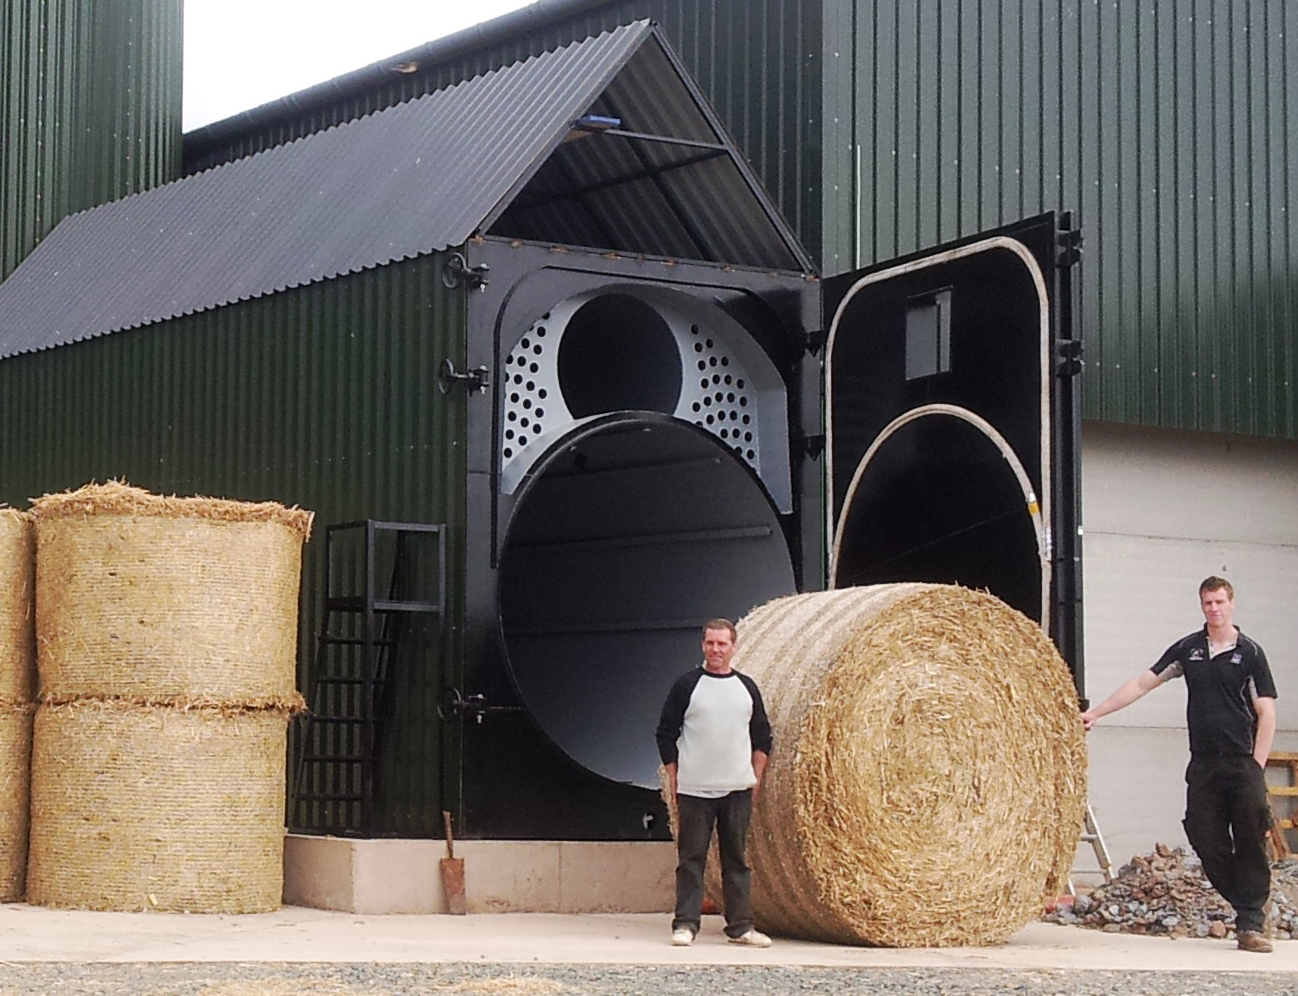 The larger bale in front of the Topling Big Straw Boiler, with the original bales to the left